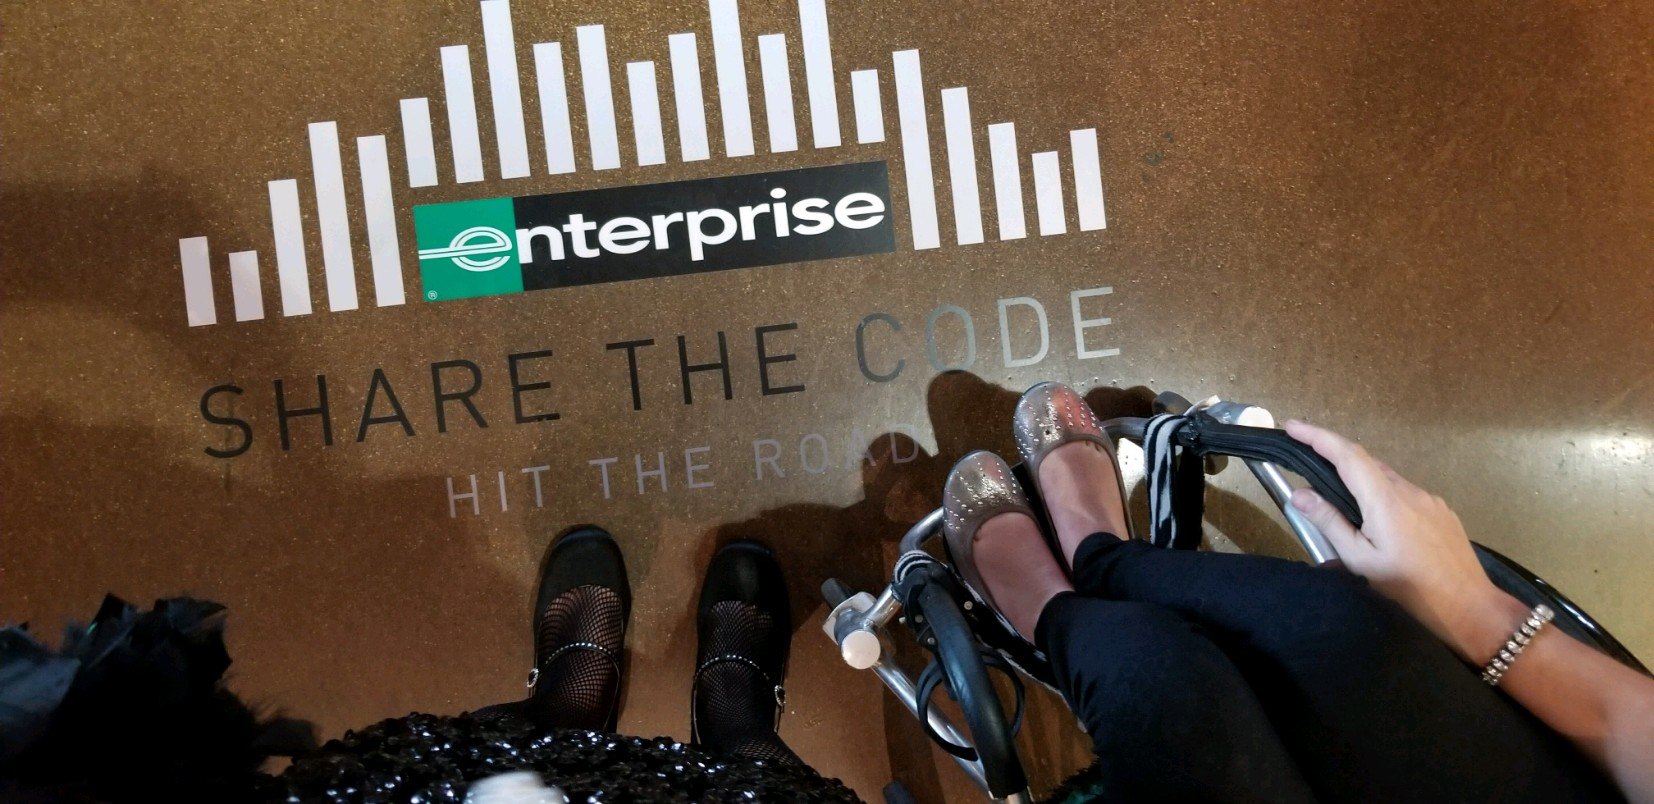 Enterprise Share the code, hit the road